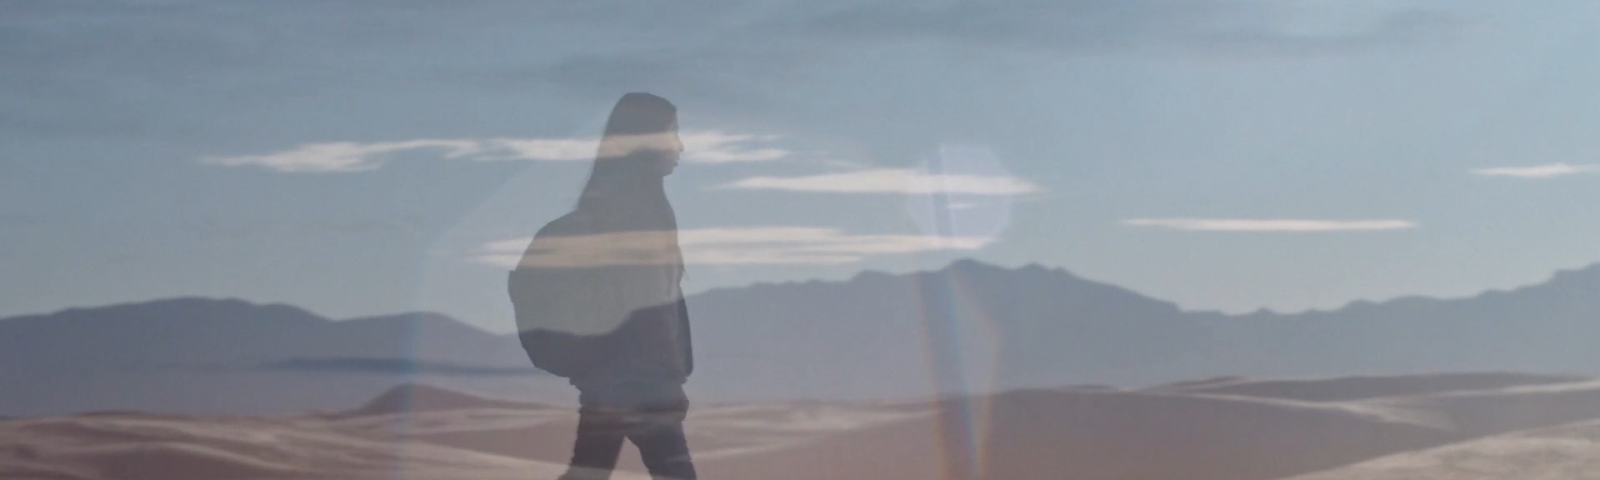 Still from AWAY TOGETHER by Sana Malik, featuring an image of protagonist Ayah carrying a backpack walking toward the right of the still, overlaid on top of an image of the New Mexico landscape.